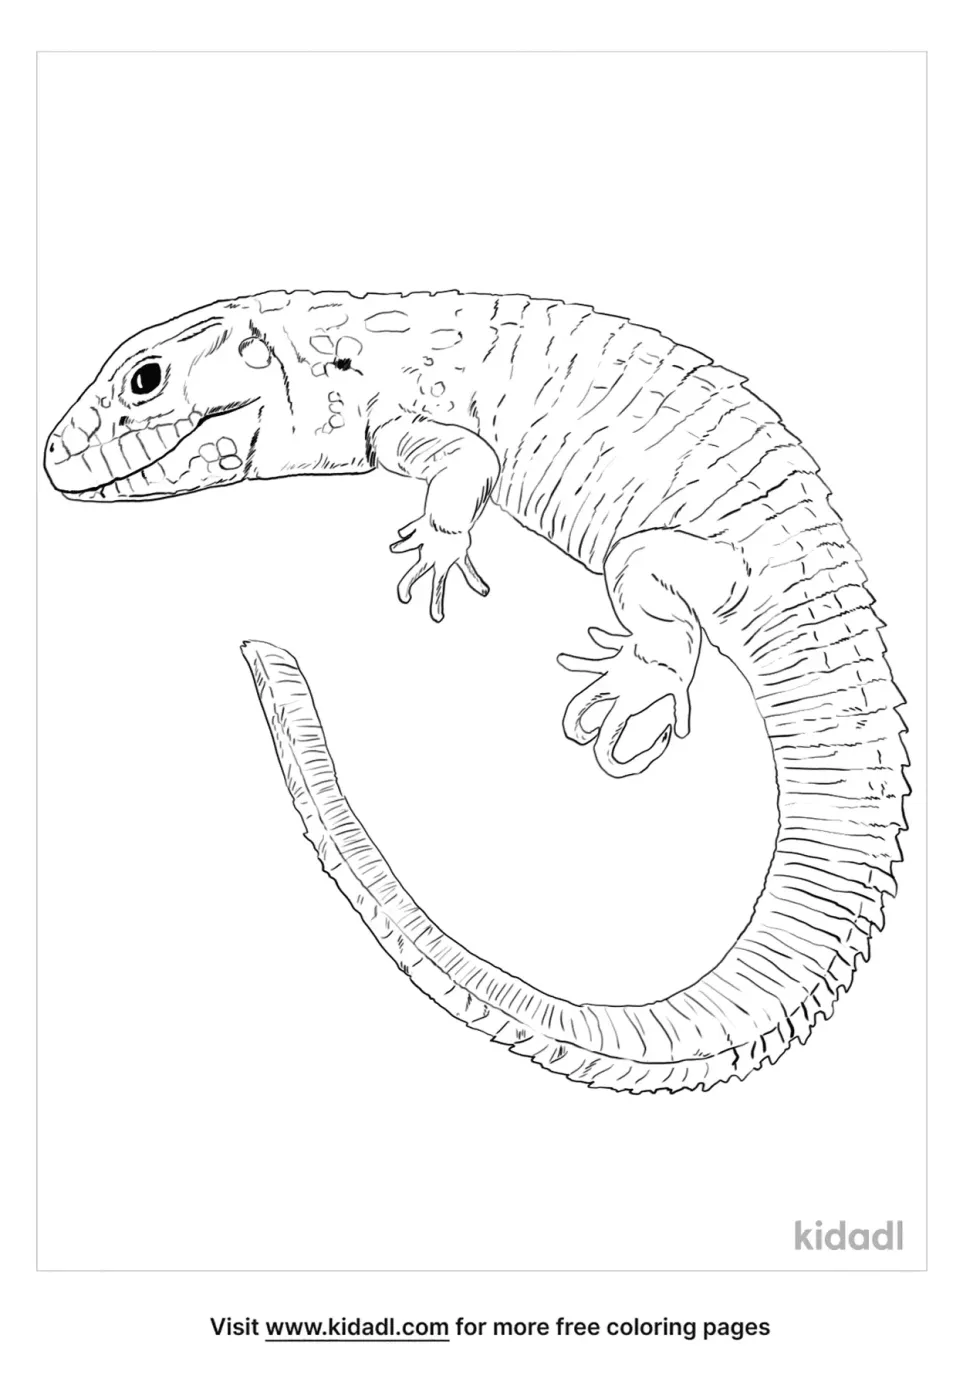 Caiman Lizard Coloring Page